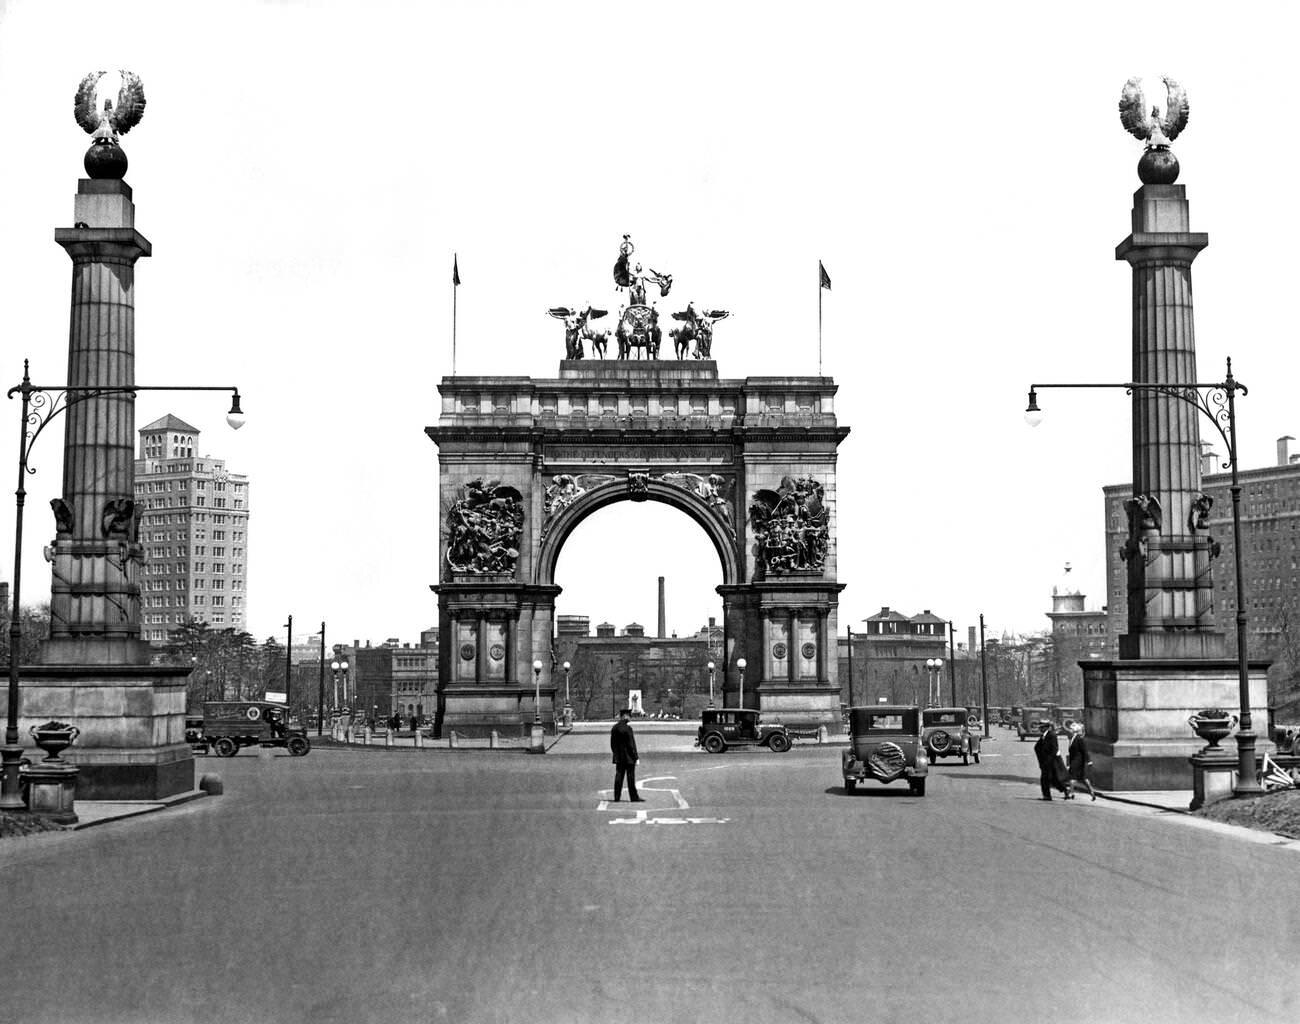 Entrance Arch To Prospect Park, One Of The Largest Municipal Parks In Brooklyn, Circa 1930.